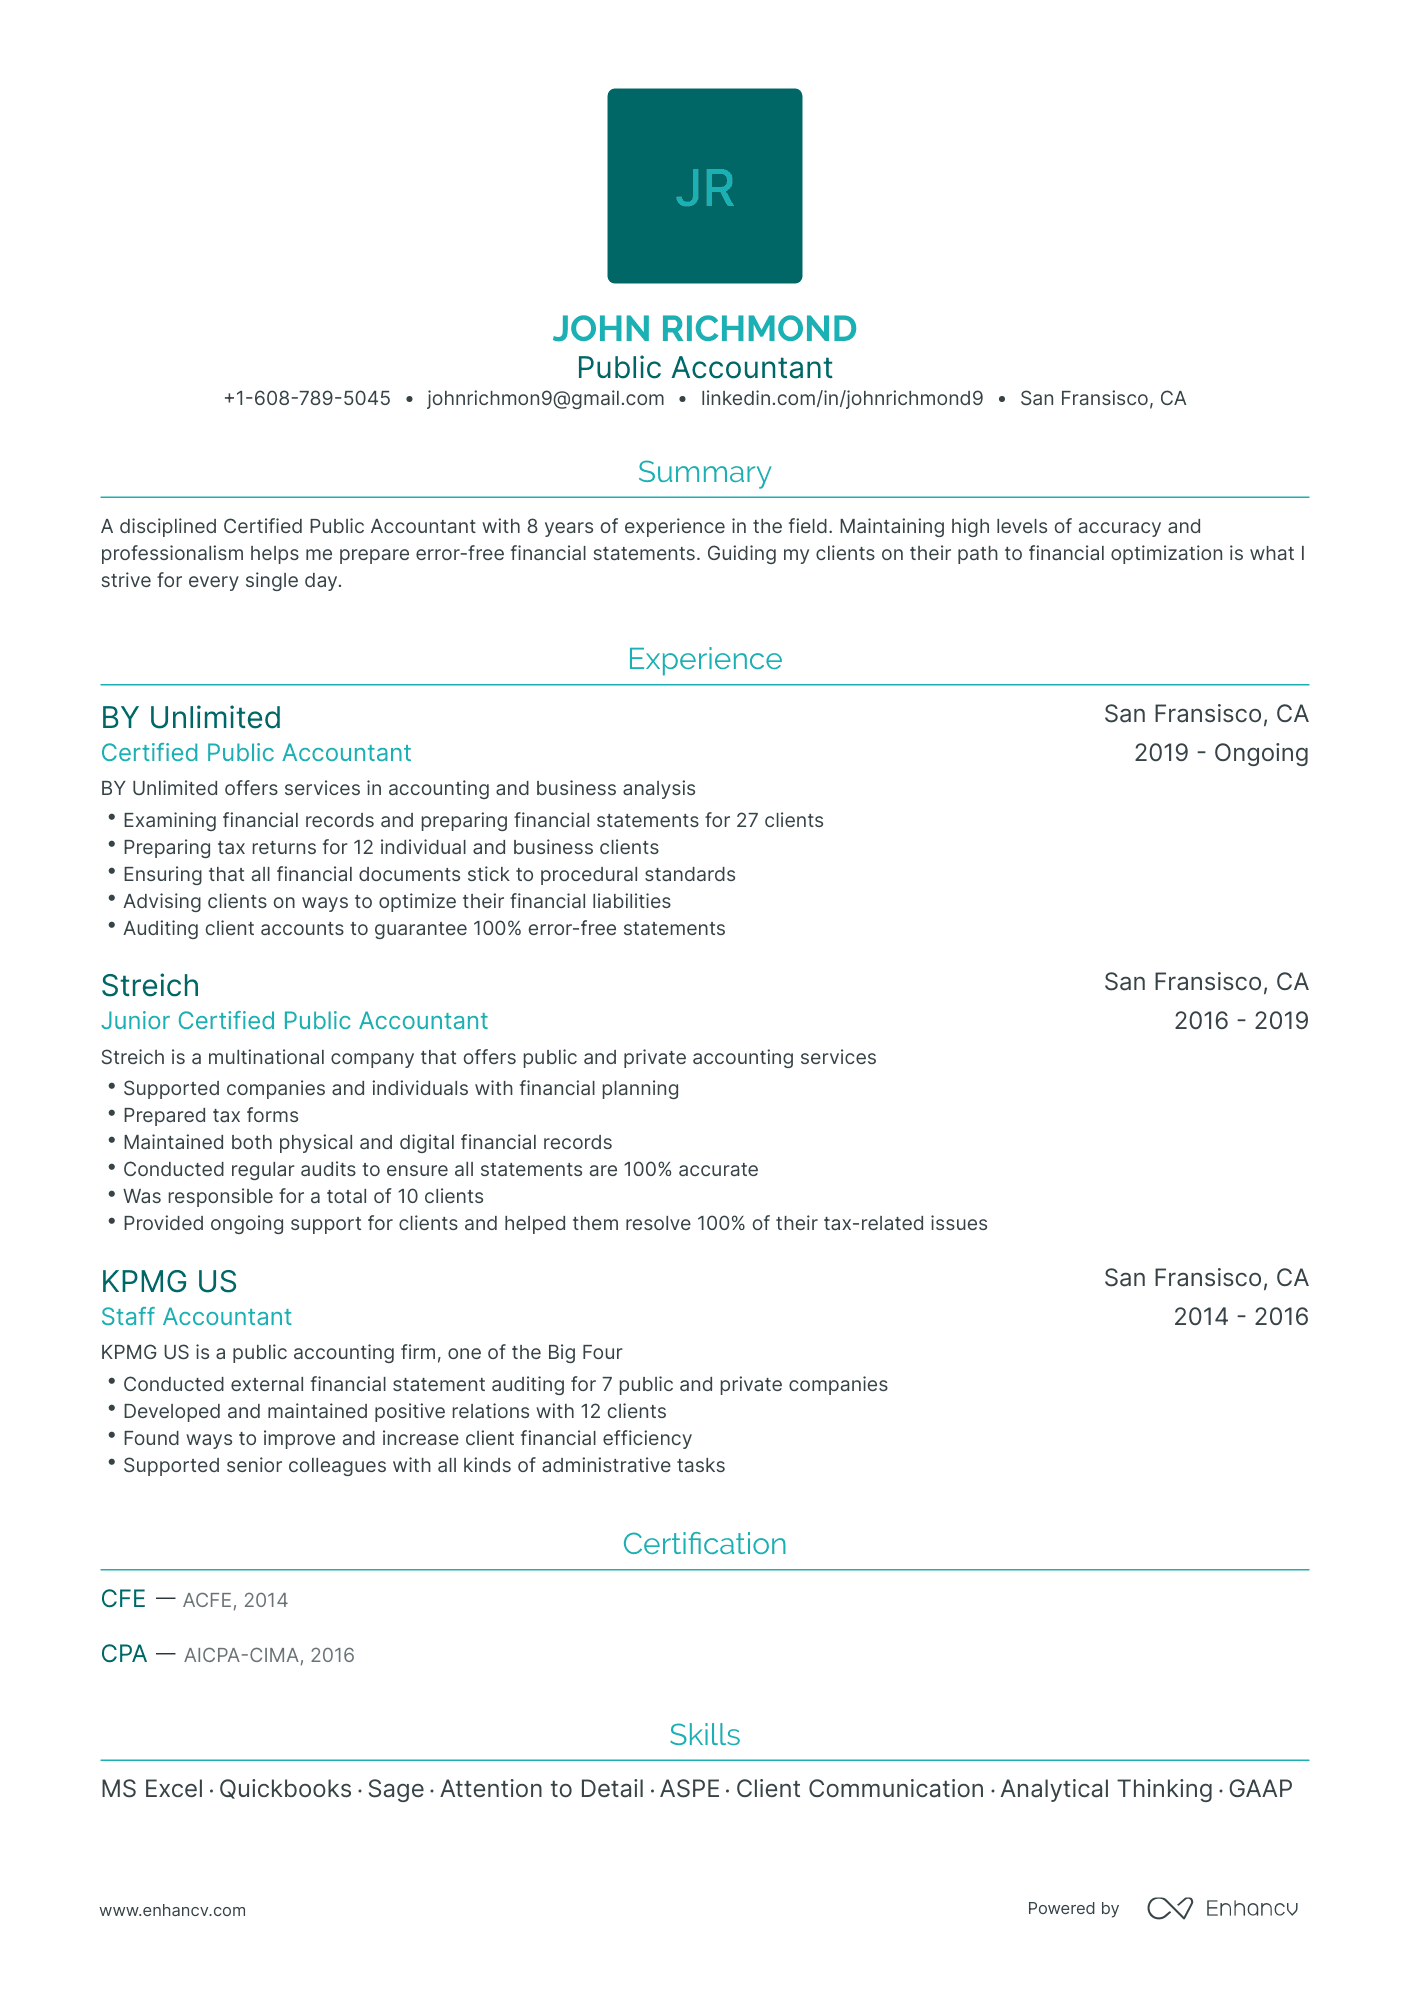 Traditional Public Accounting Resume Template